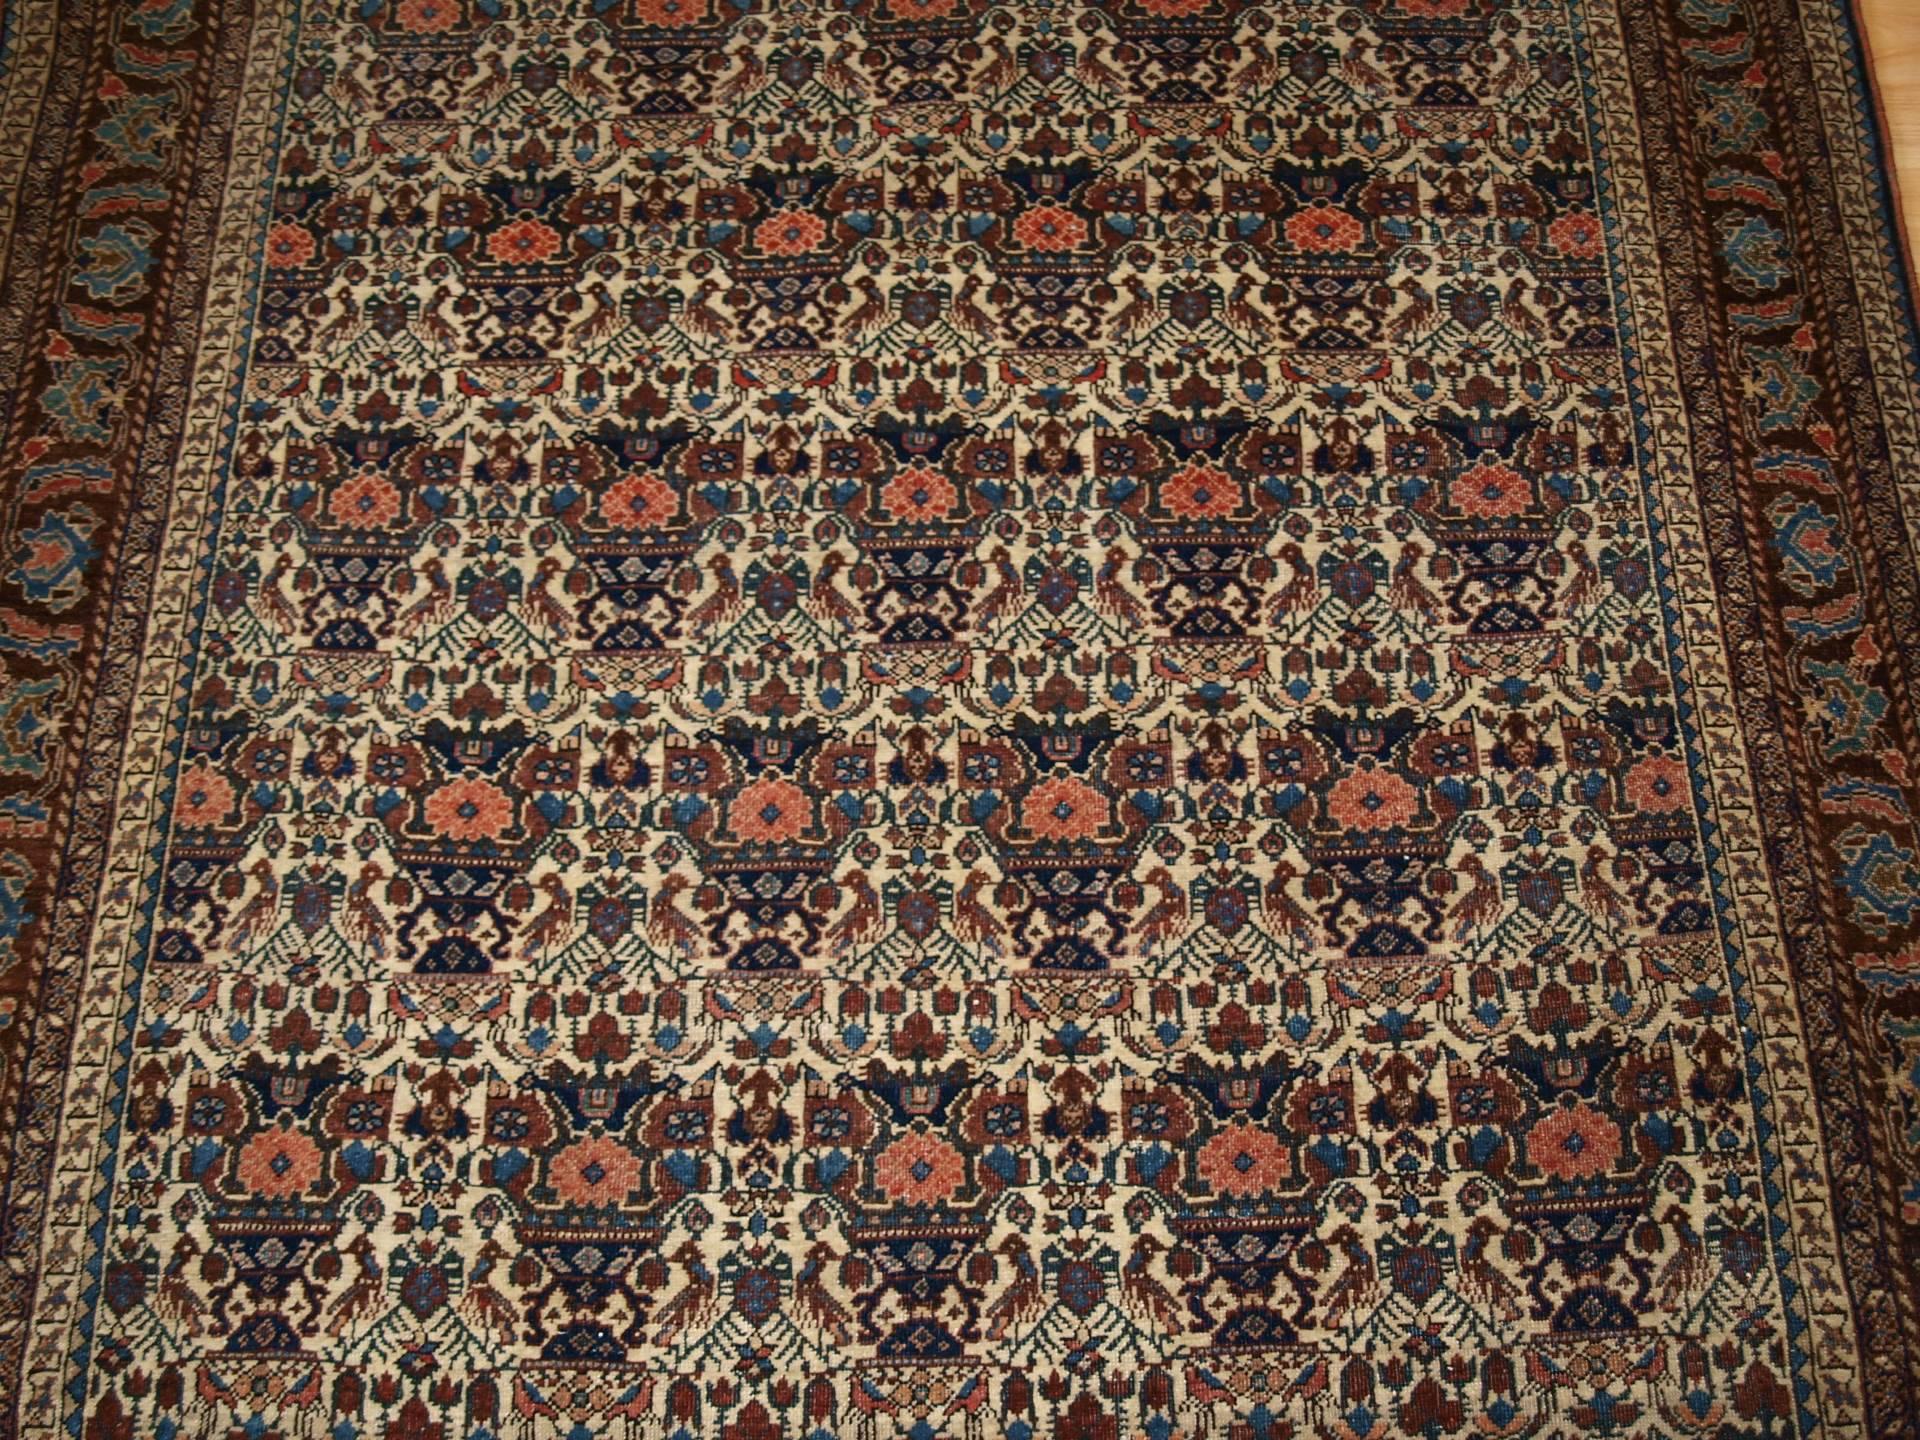 Early 20th Century Antique Abedeh Rug with the Classic ‘Vase and Peacock’ Design, circa 1900-1920